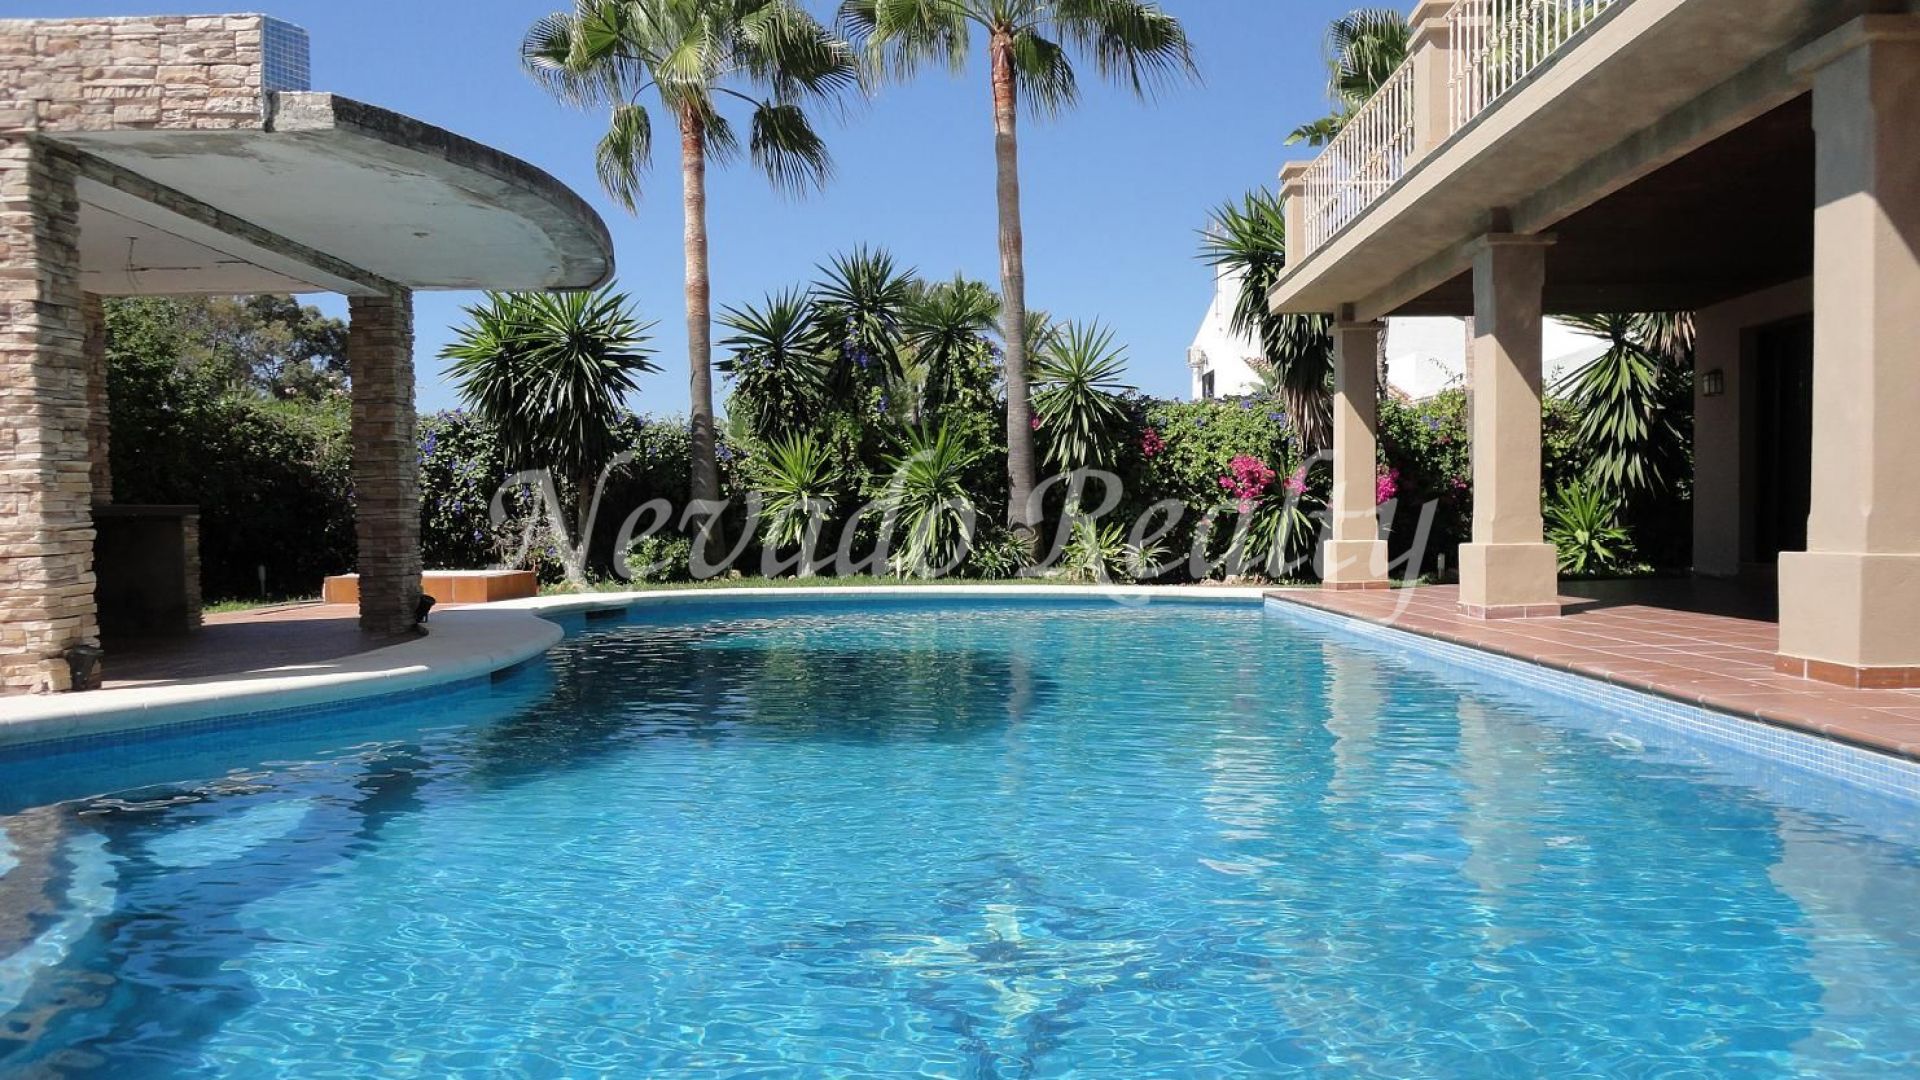 Family villa for sale with private pool and garden on the Golden Mile of Marbella